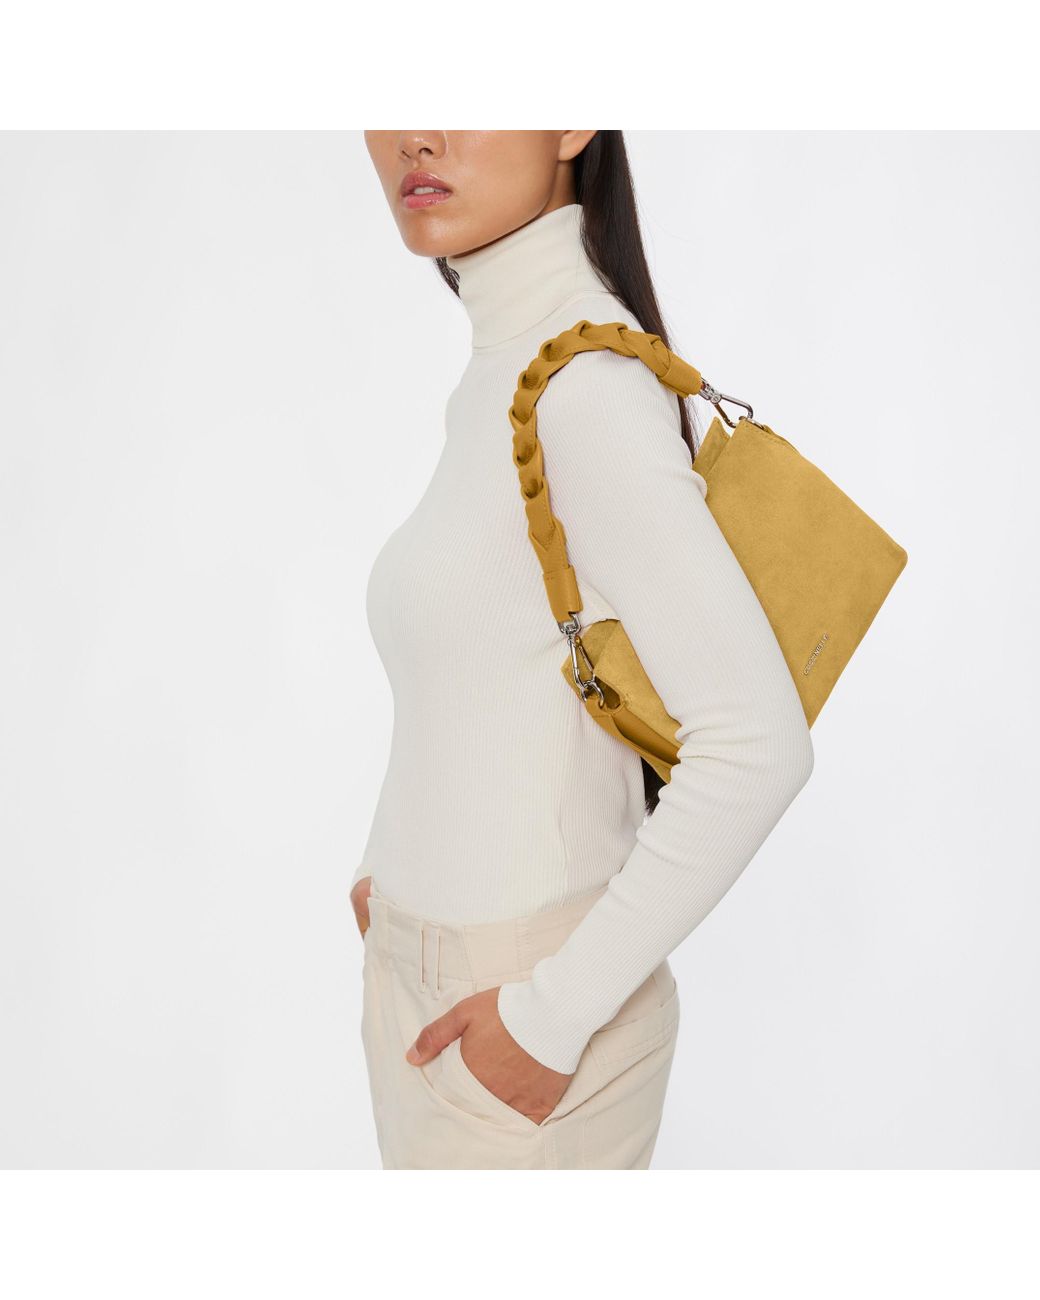 Coccinelle Suede And Grained Leather Handbag Boheme Suede Bimaterial Small  in Metallic | Lyst